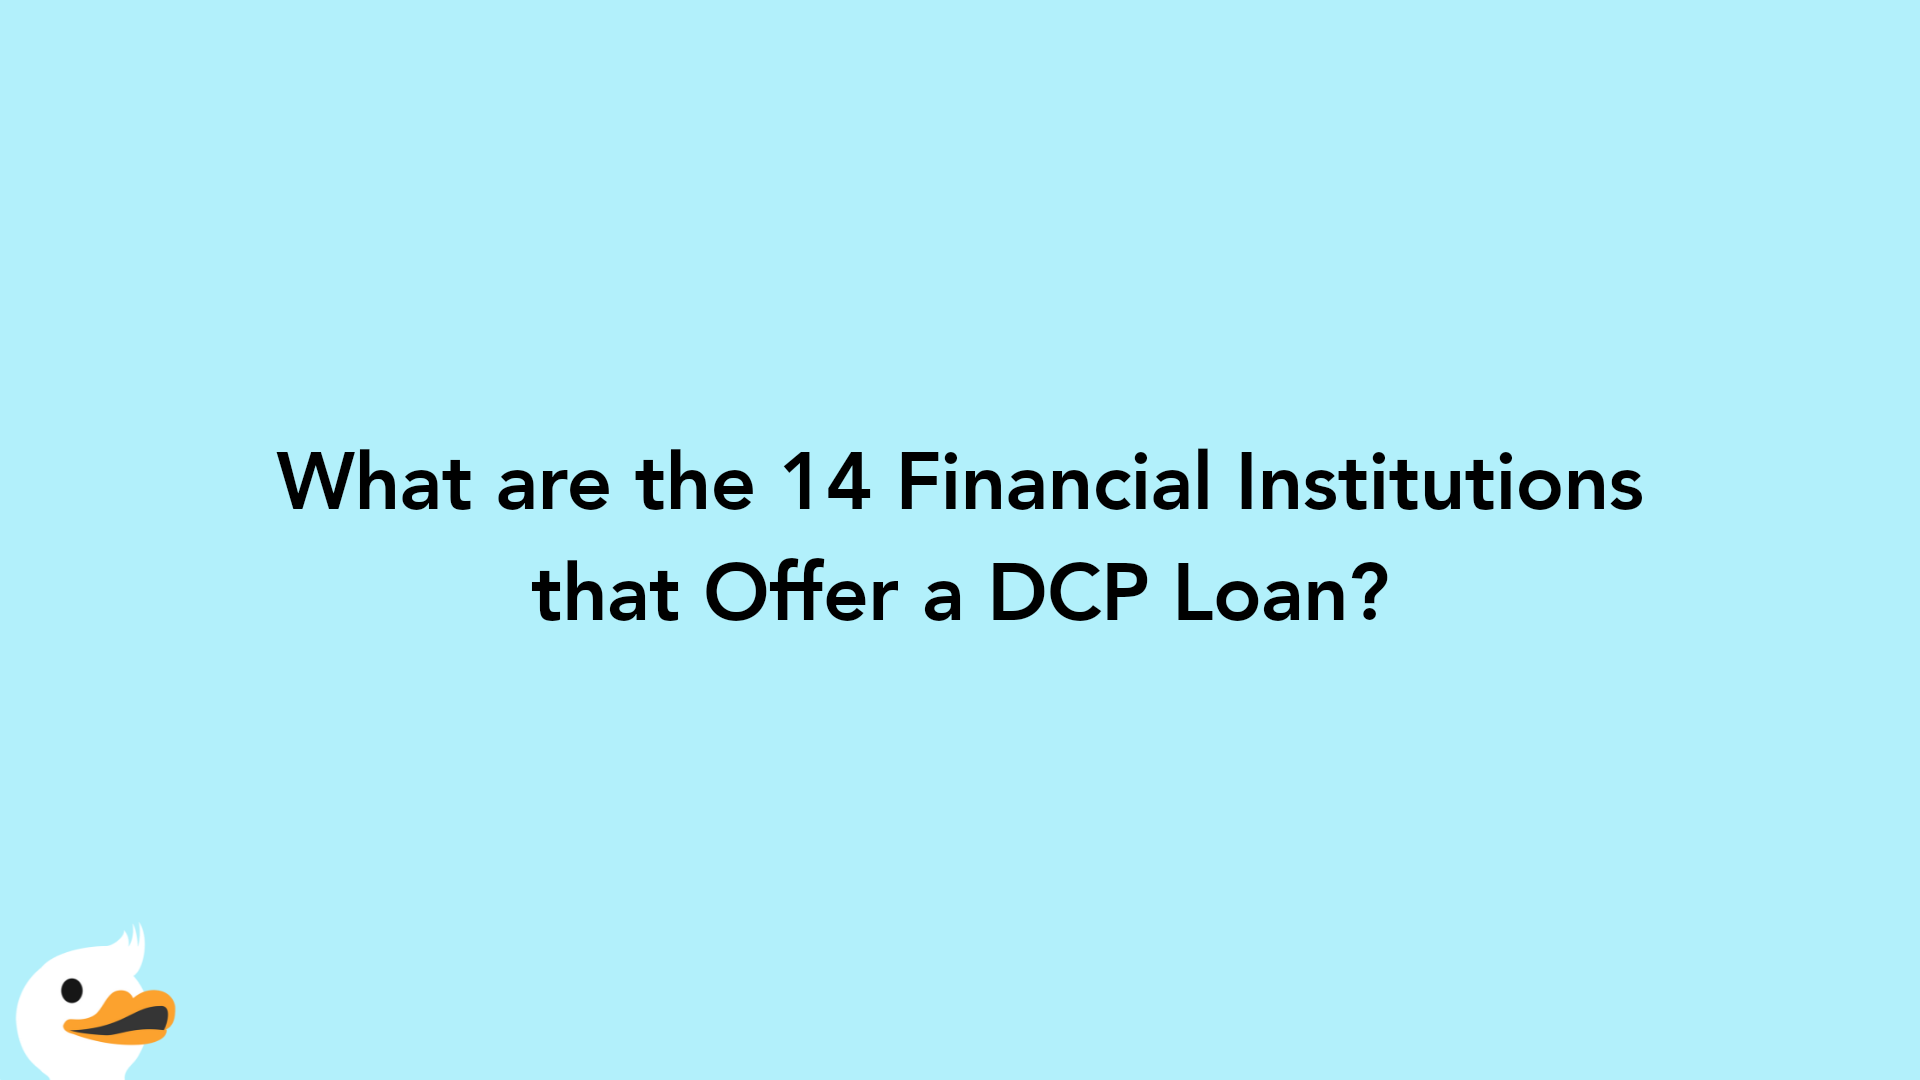 What are the 14 Financial Institutions that Offer a DCP Loan?